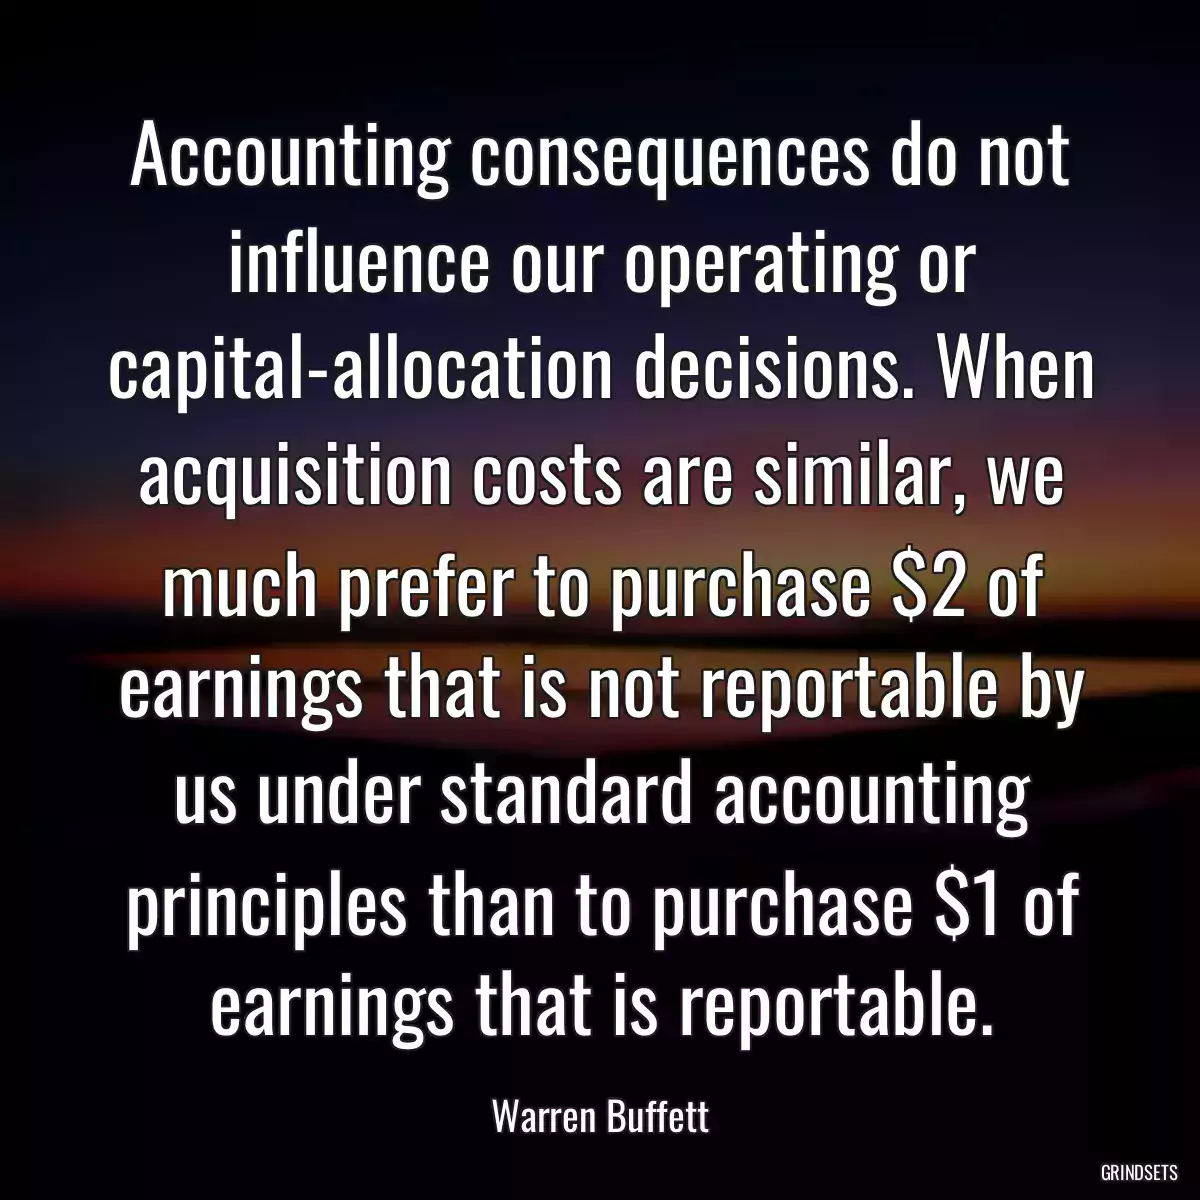 Accounting consequences do not influence our operating or capital-allocation decisions. When acquisition costs are similar, we much prefer to purchase $2 of earnings that is not reportable by us under standard accounting principles than to purchase $1 of earnings that is reportable.